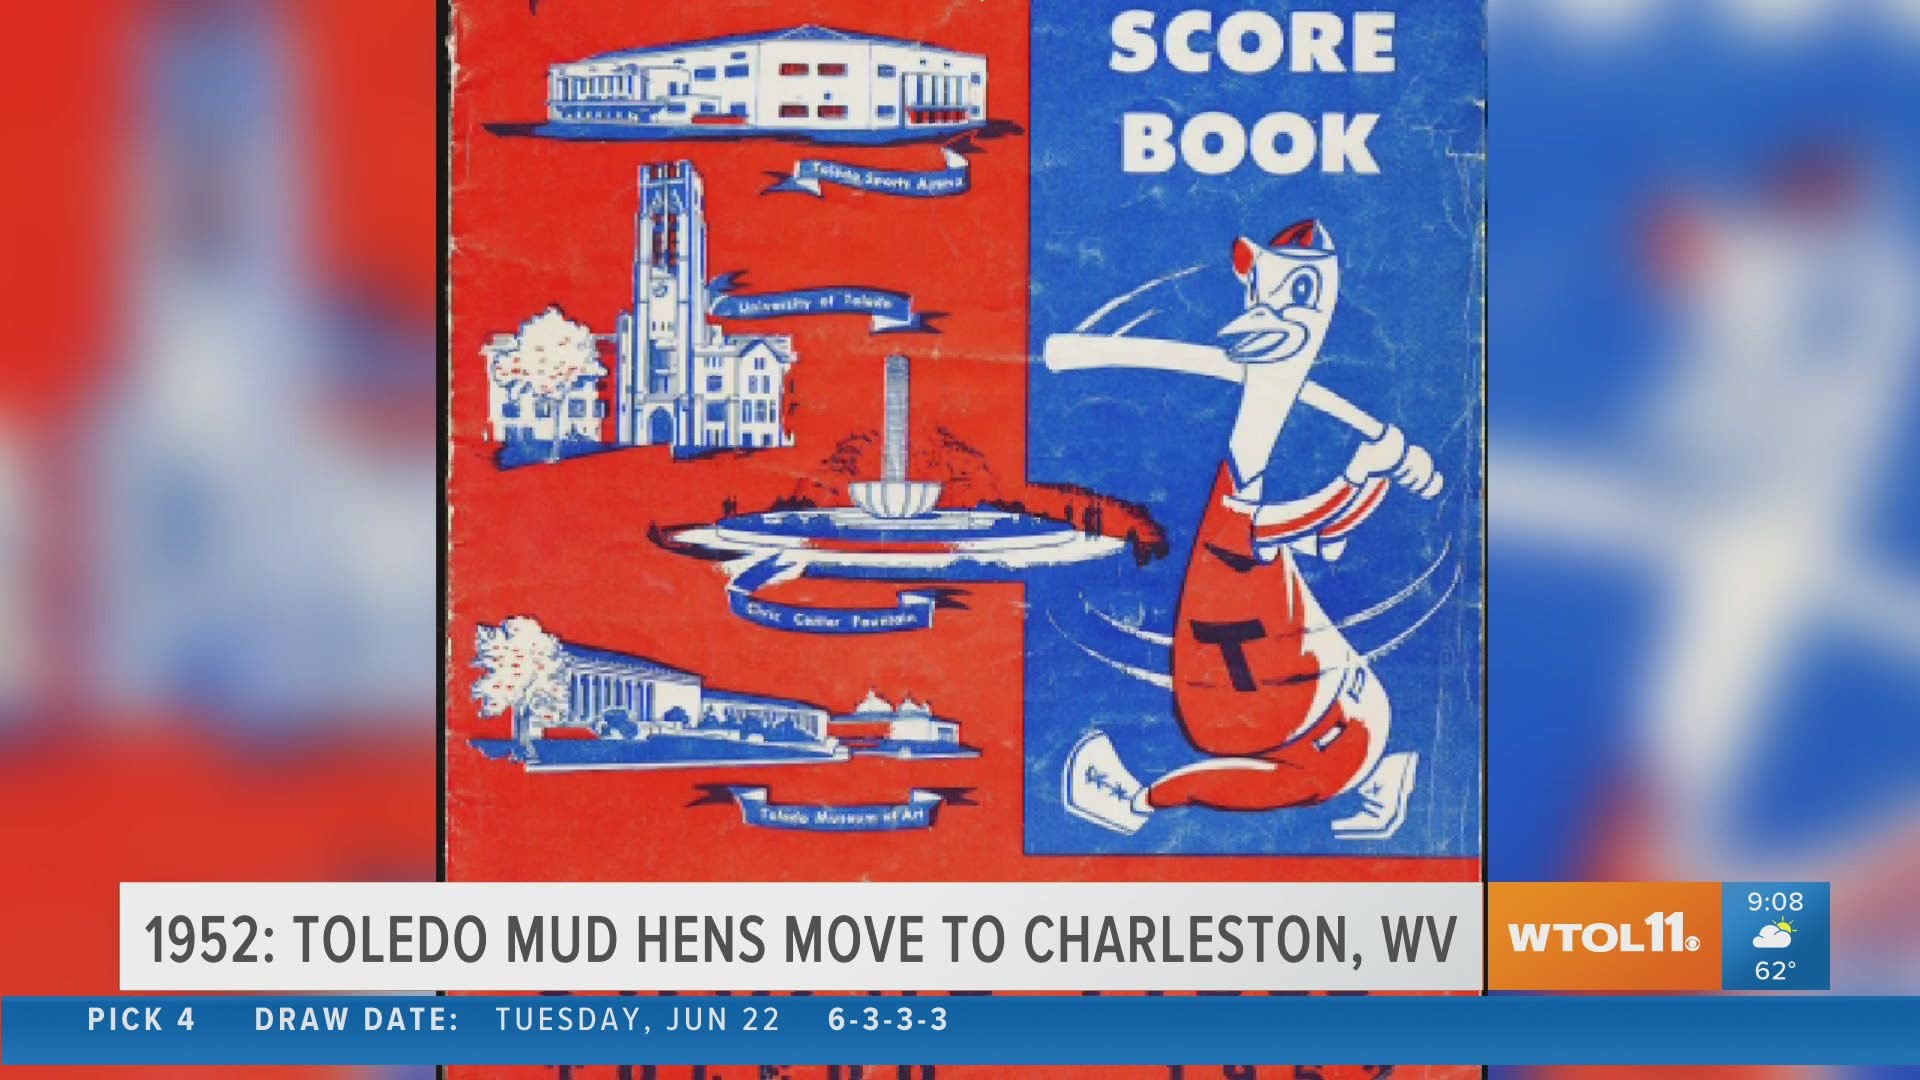 On June 23, 1952, the Toledo Mud Hens moved to Charleston, West Virginia in a shocking move by owner Danny Menendez.